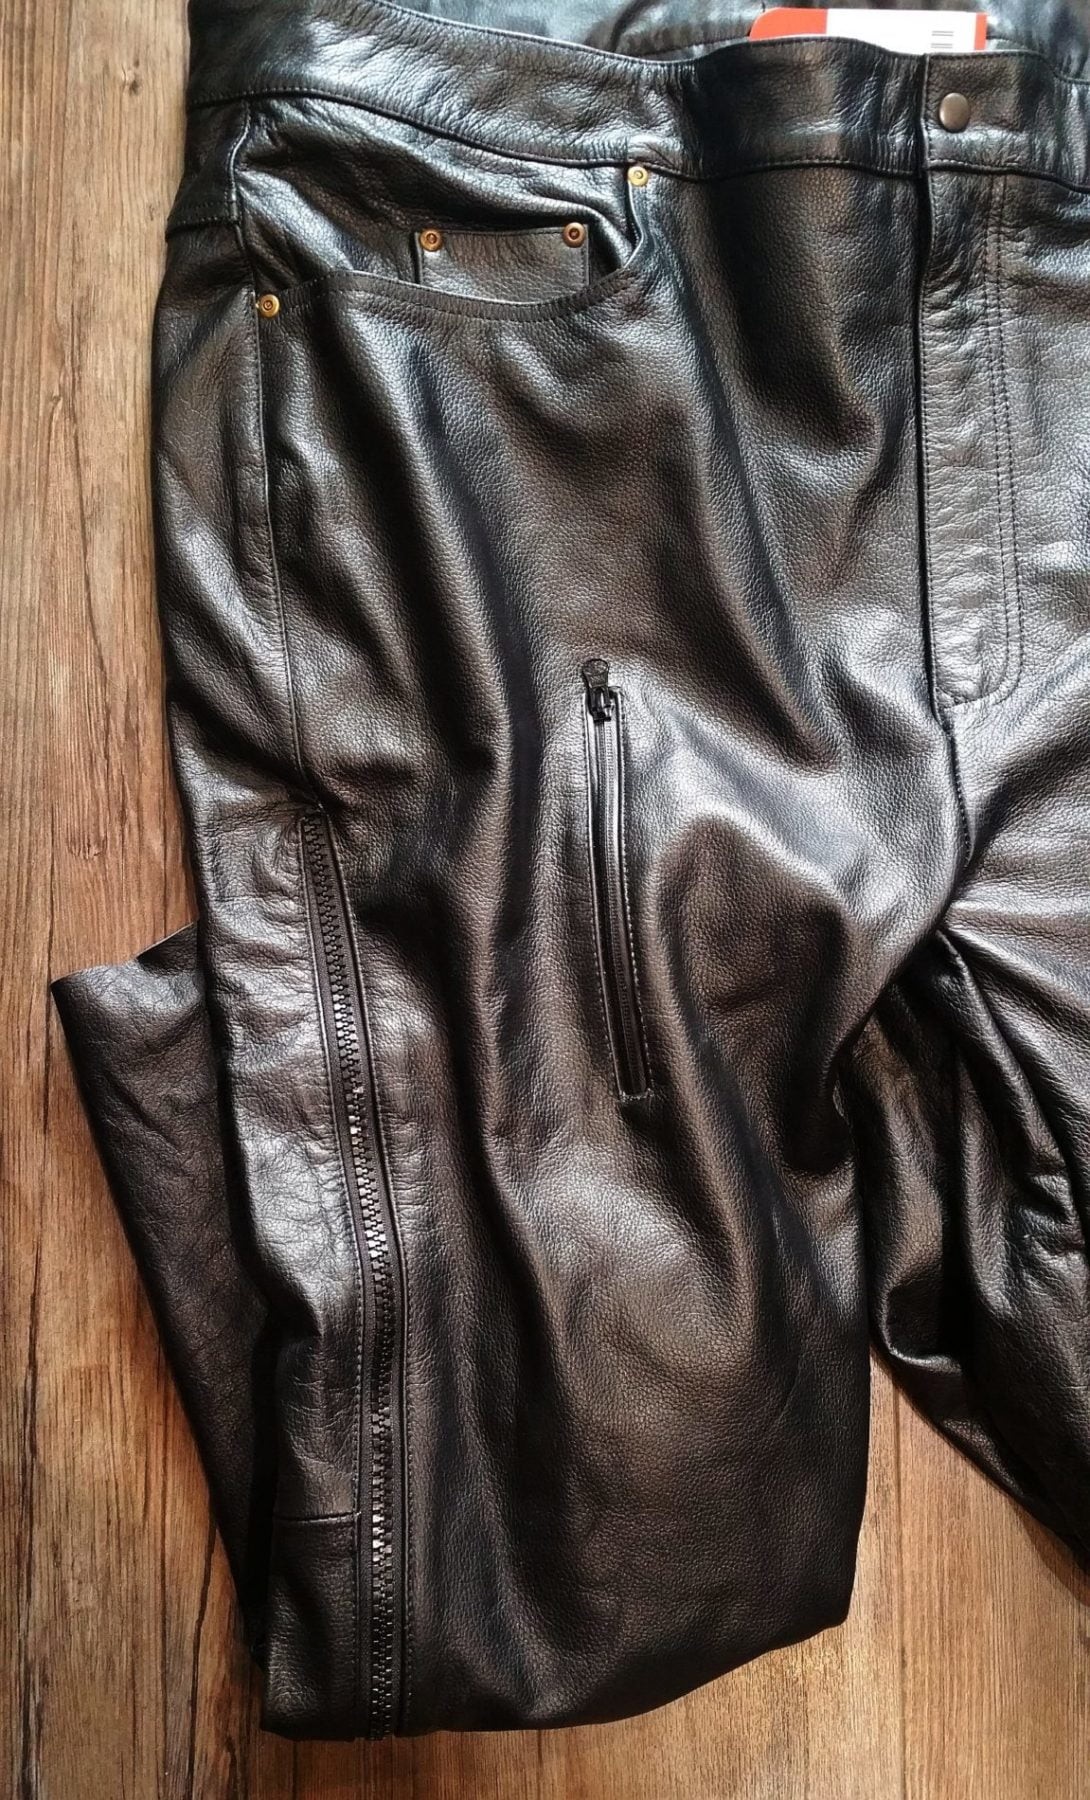 Plus-sized, short legs? Rejoice in these armored leather riding pants!